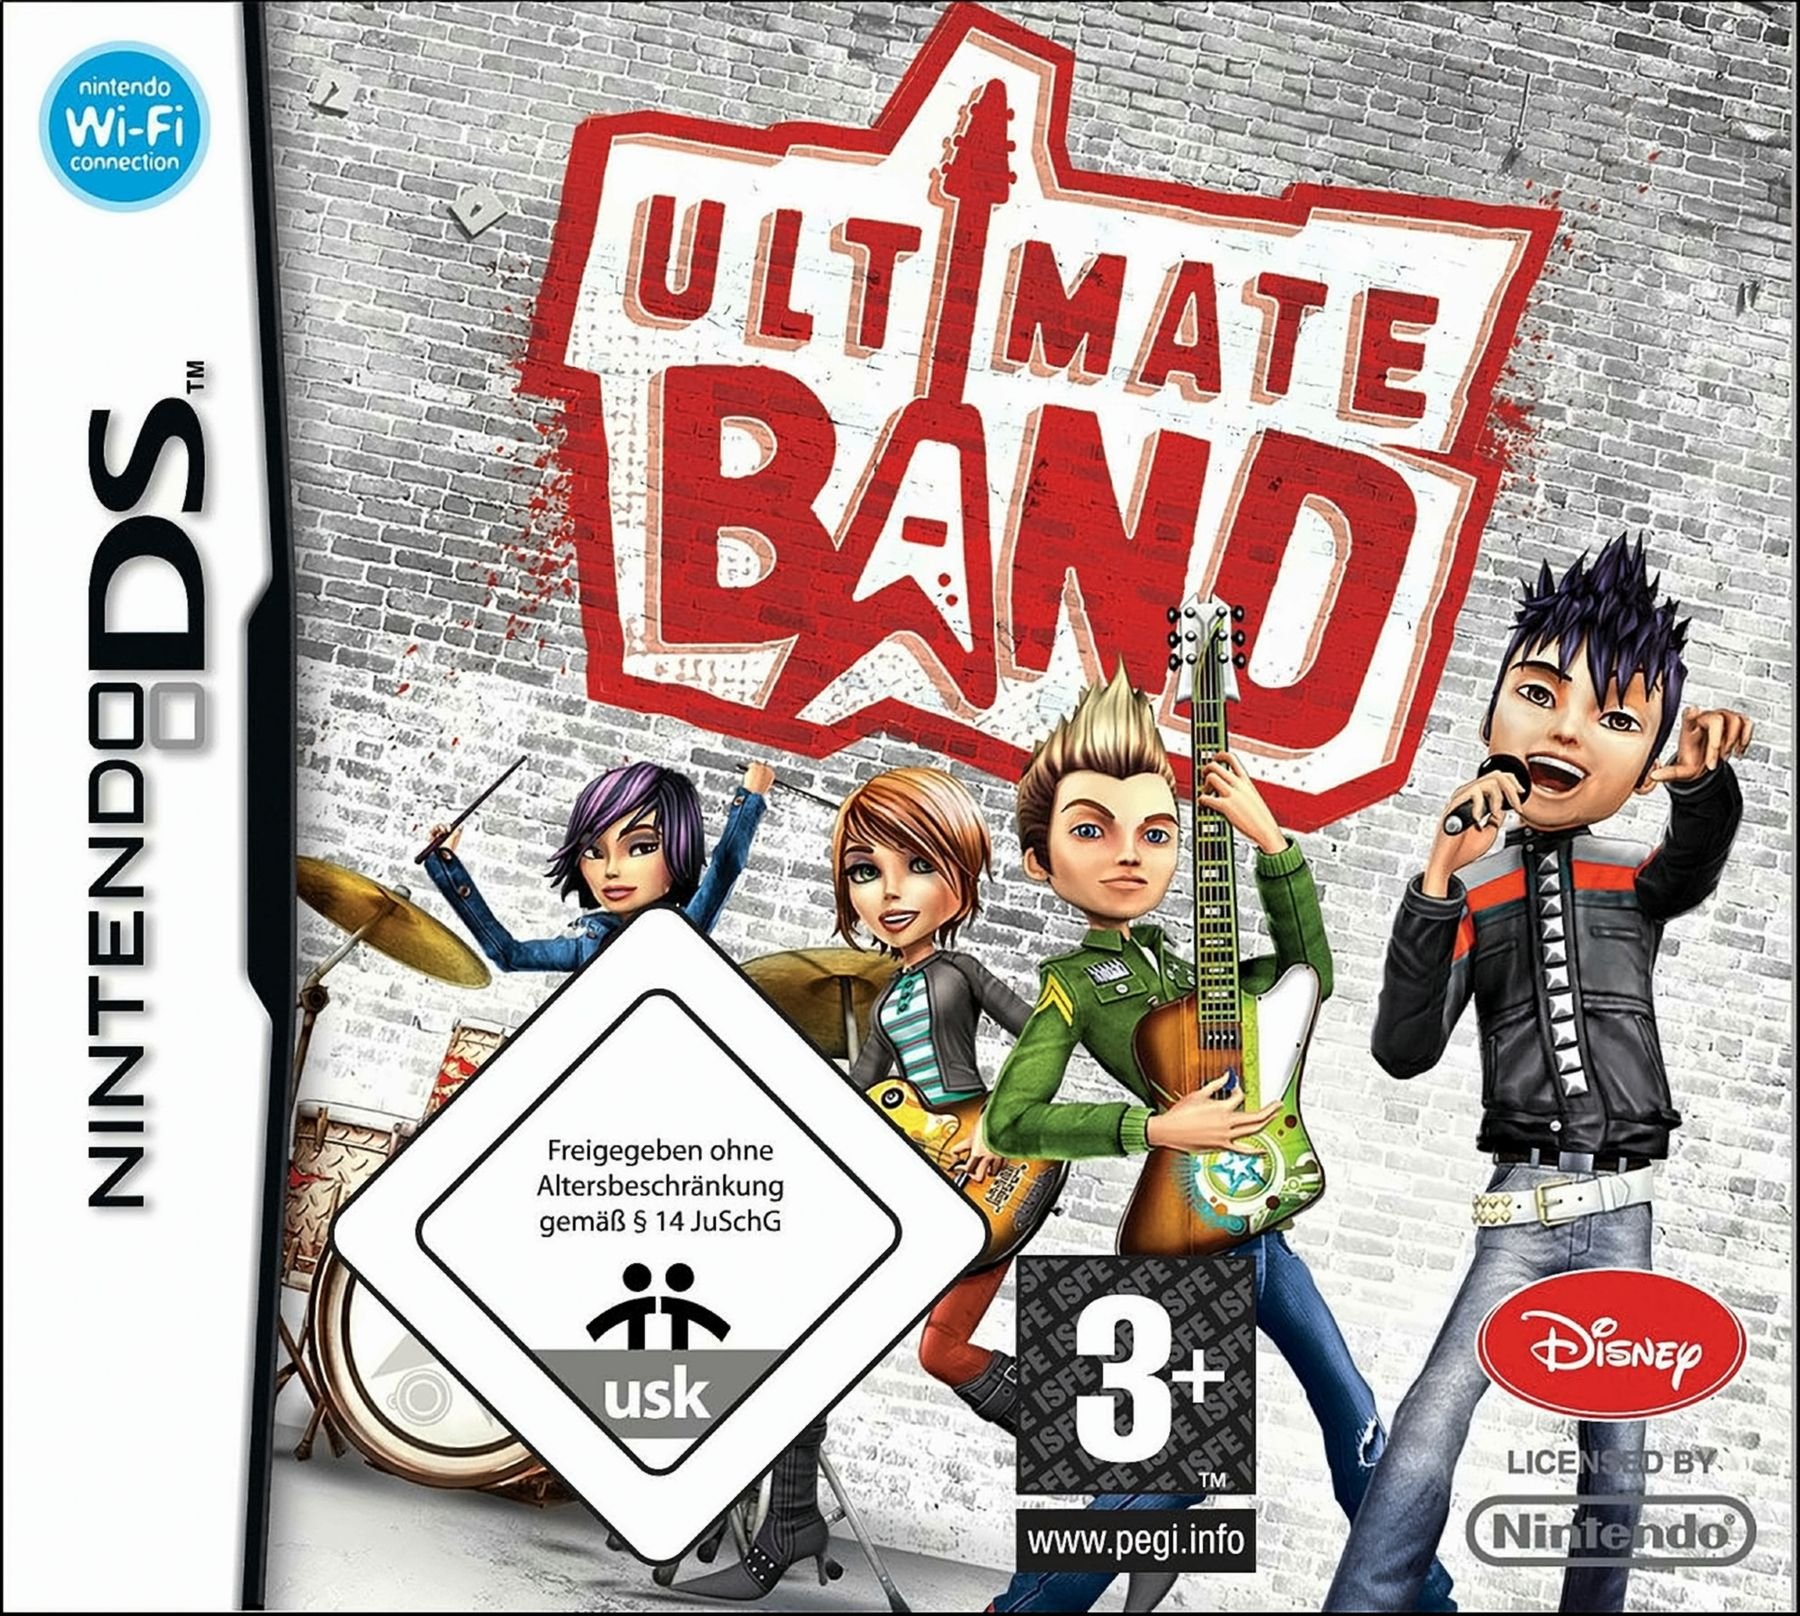 Band Ultimate - DS] [Nintendo